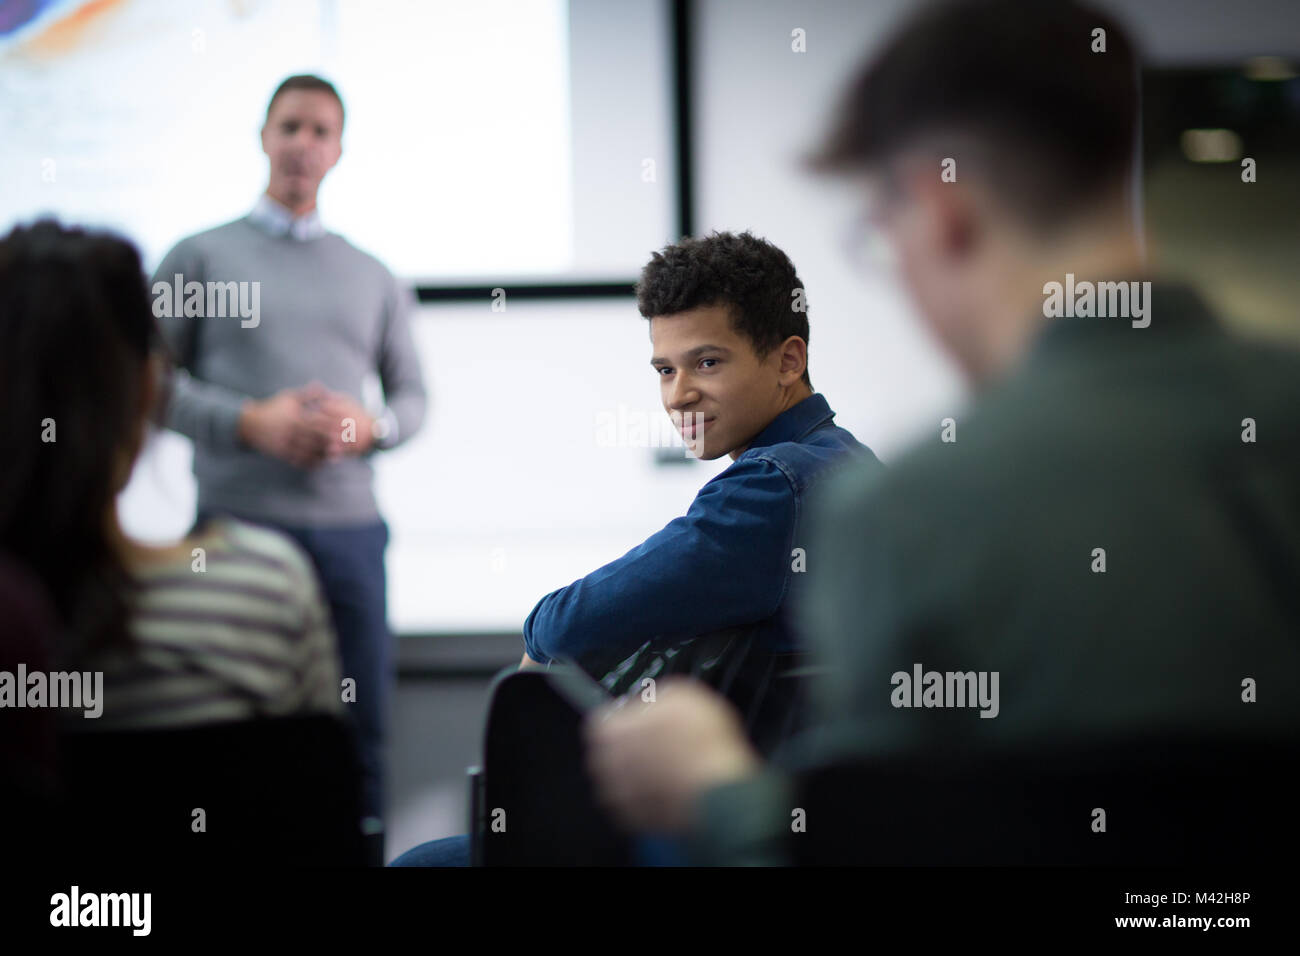 Student listening to a question at a lecture Stock Photo